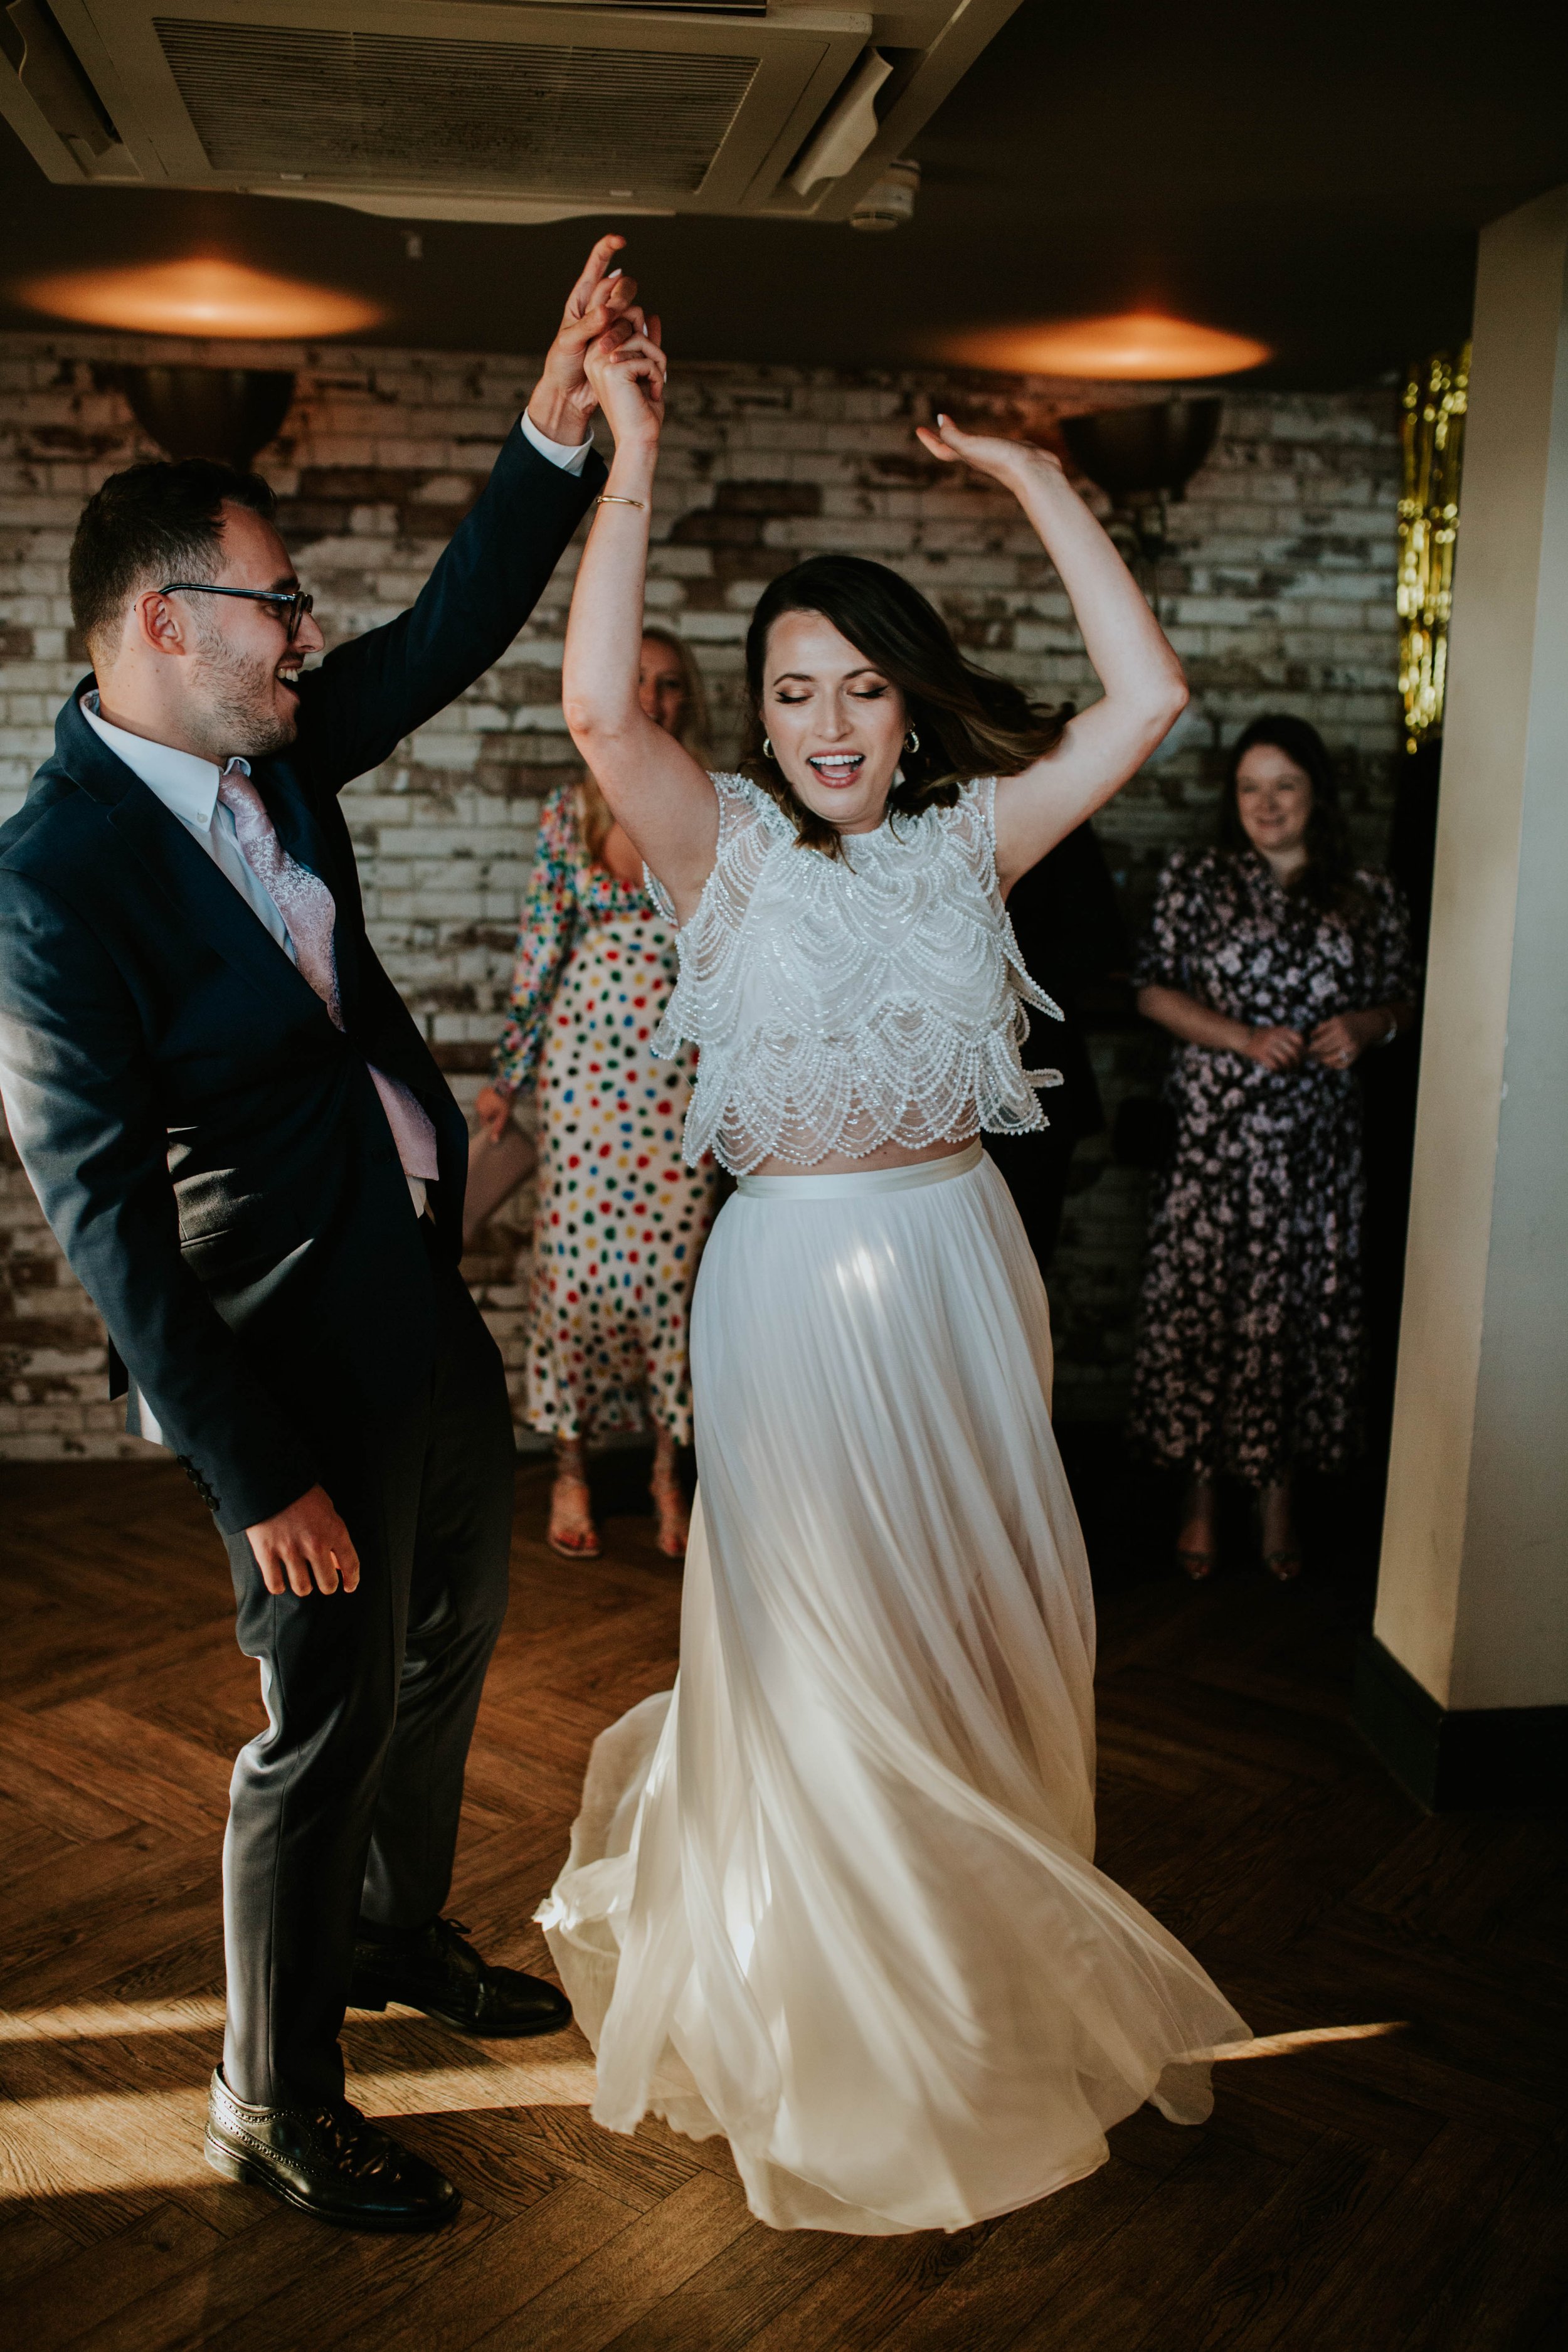  A bride and groom dance together, the bride is mid twirl and has a big smile on her face.  